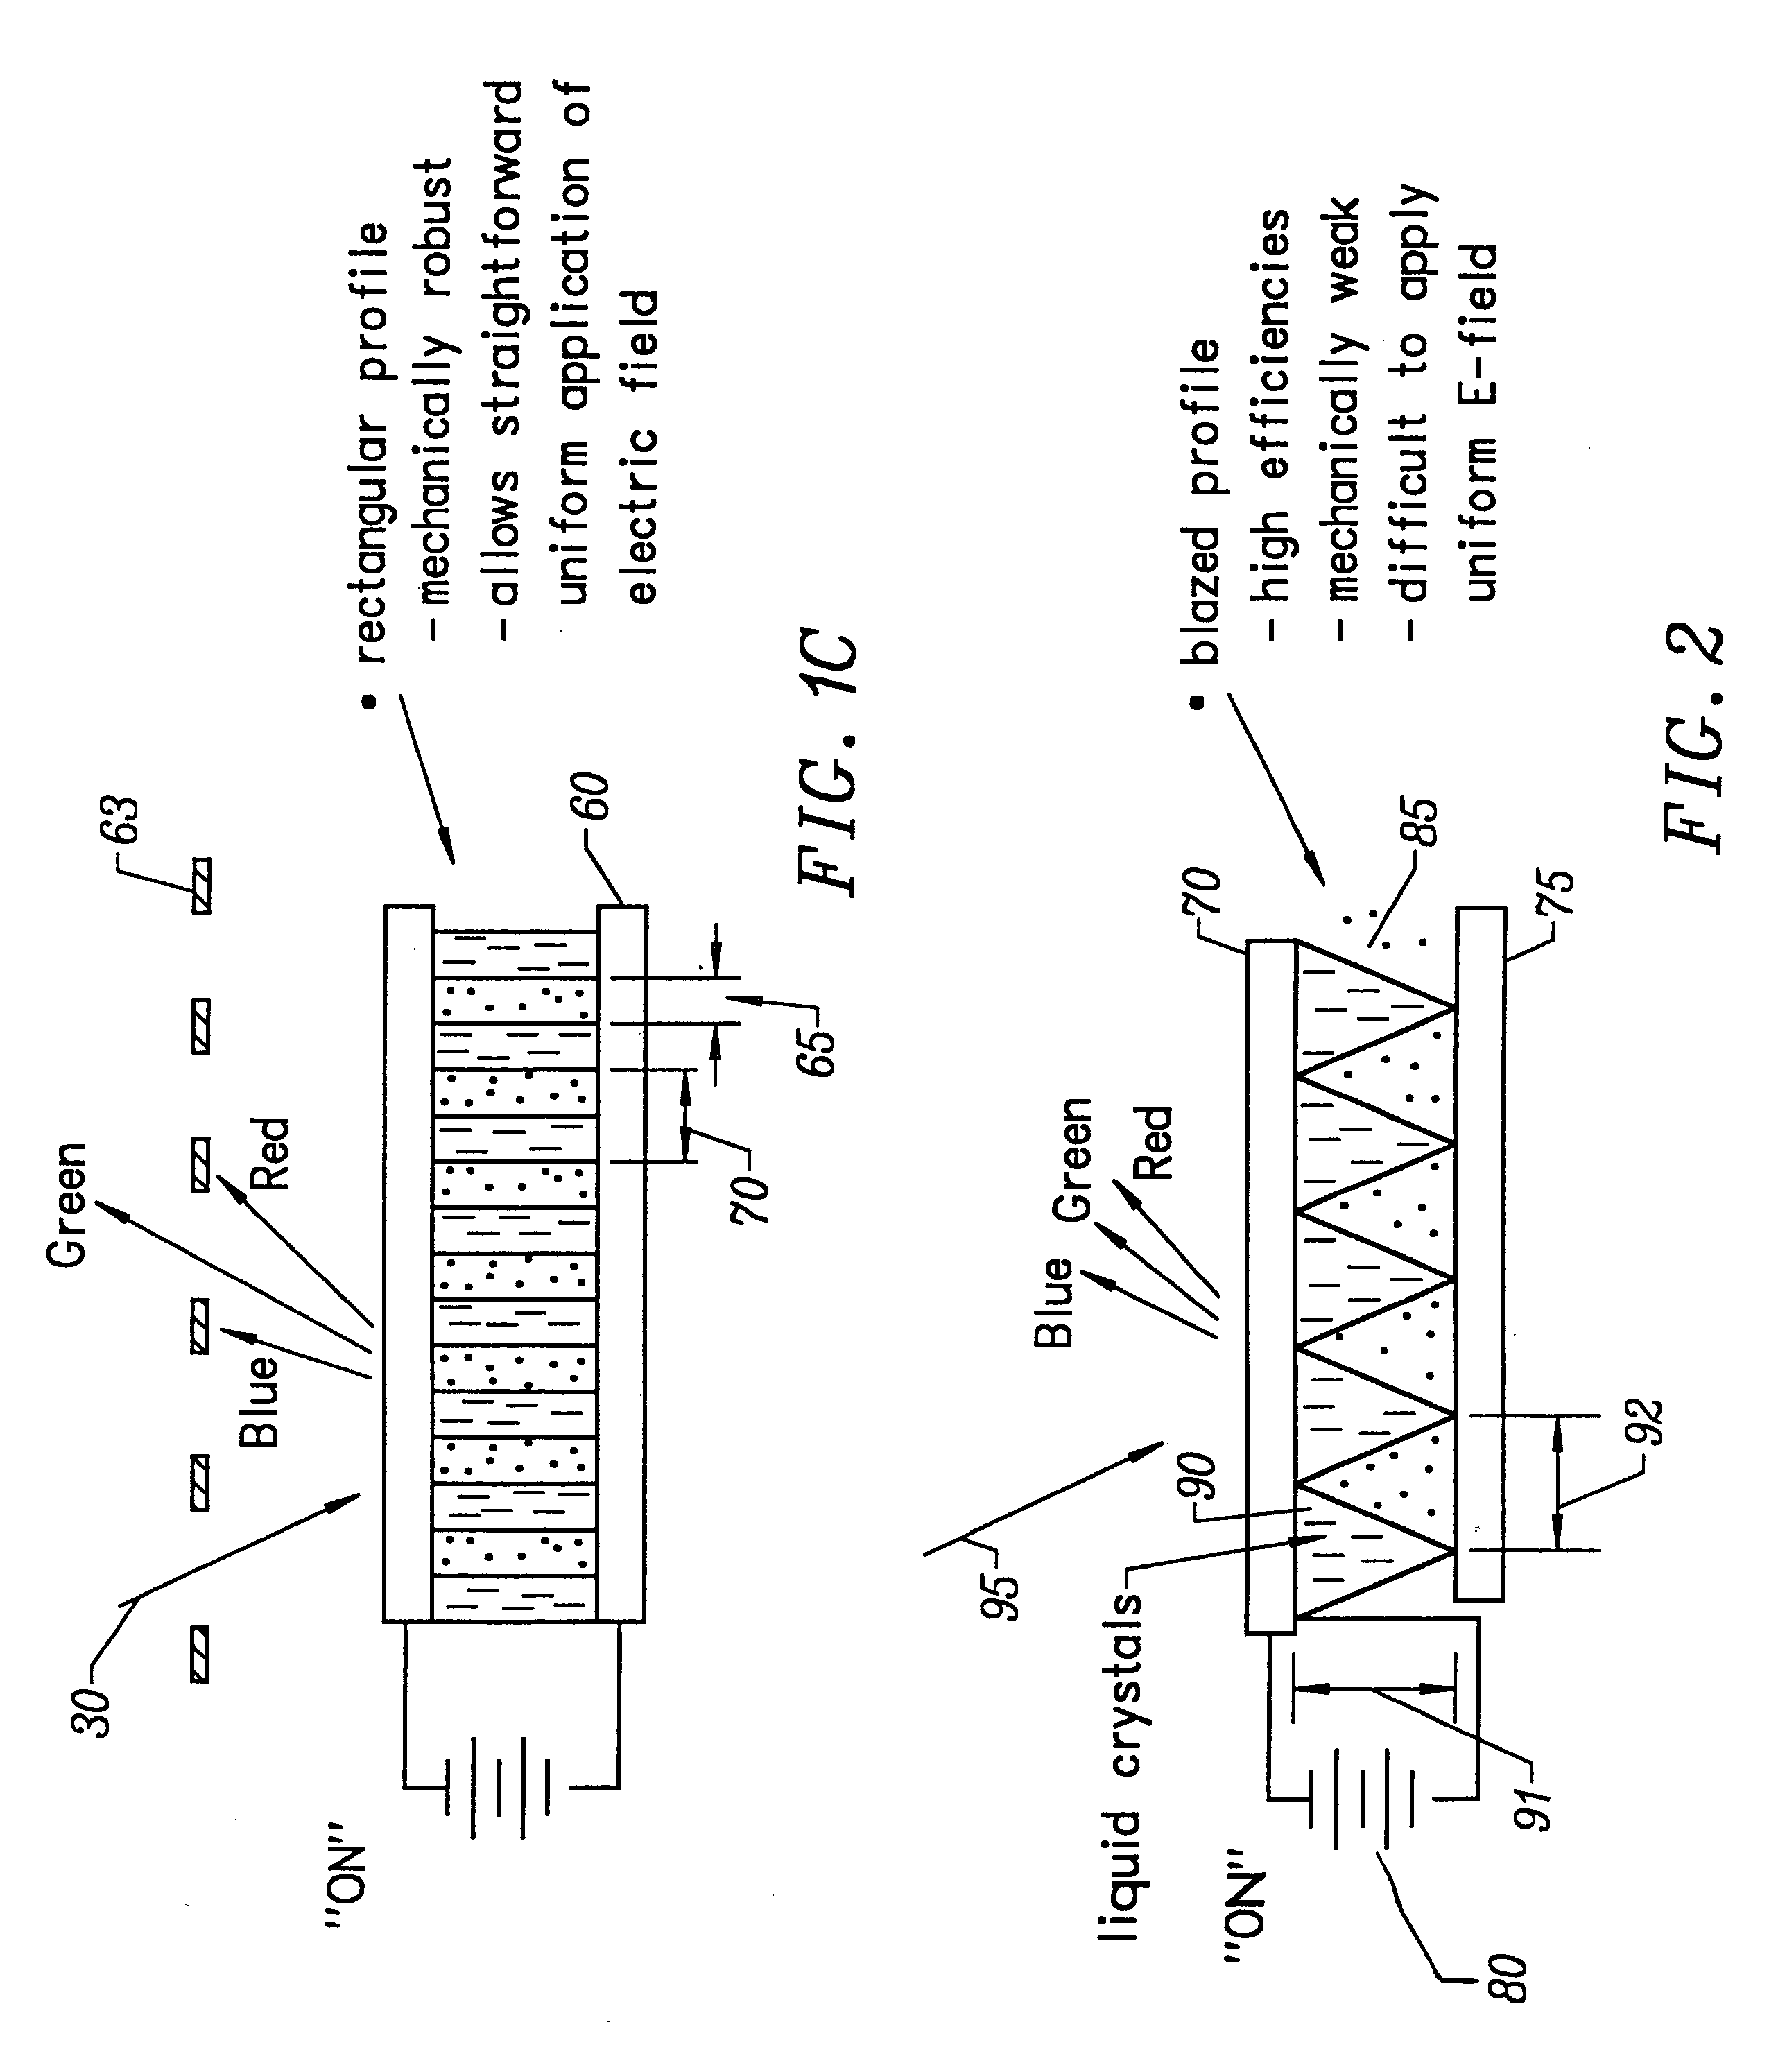 Method and apparatus for forming optical gratings